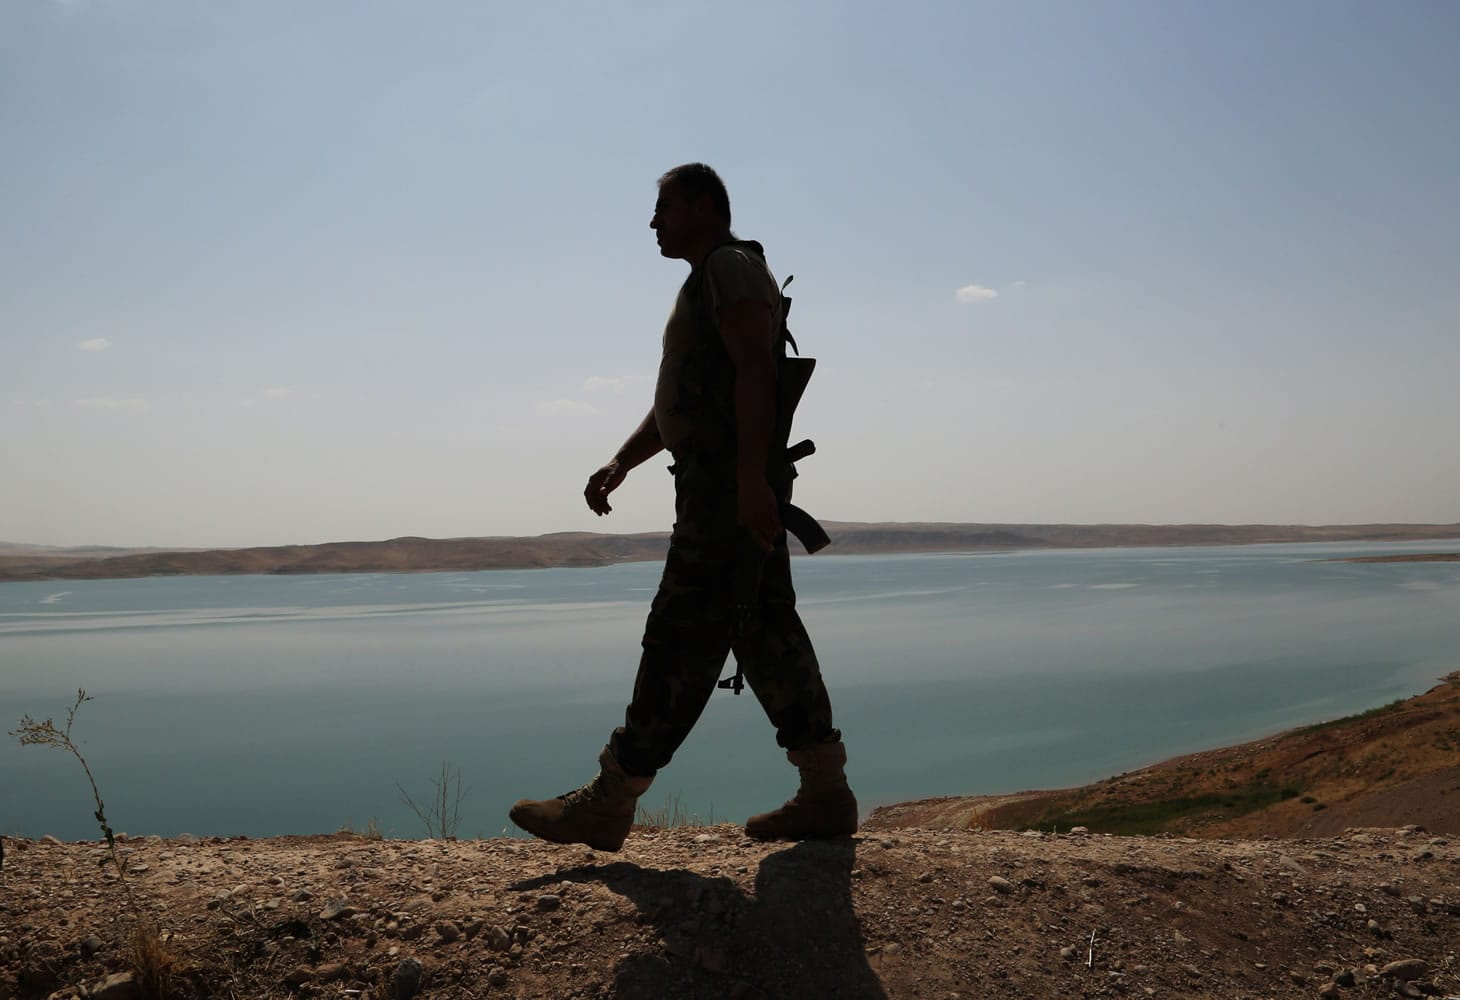 A Kurdish peshmerga fighter patrols Sunday near the Mosul Dam at the town of Chamibarakat outside Mosul, Iraq. Kurdish forces took over parts of the largest dam in Iraq on Sunday, less than two weeks after it was captured by the Islamic State extremist group, Kurdish security officials said, with aid from U.S.